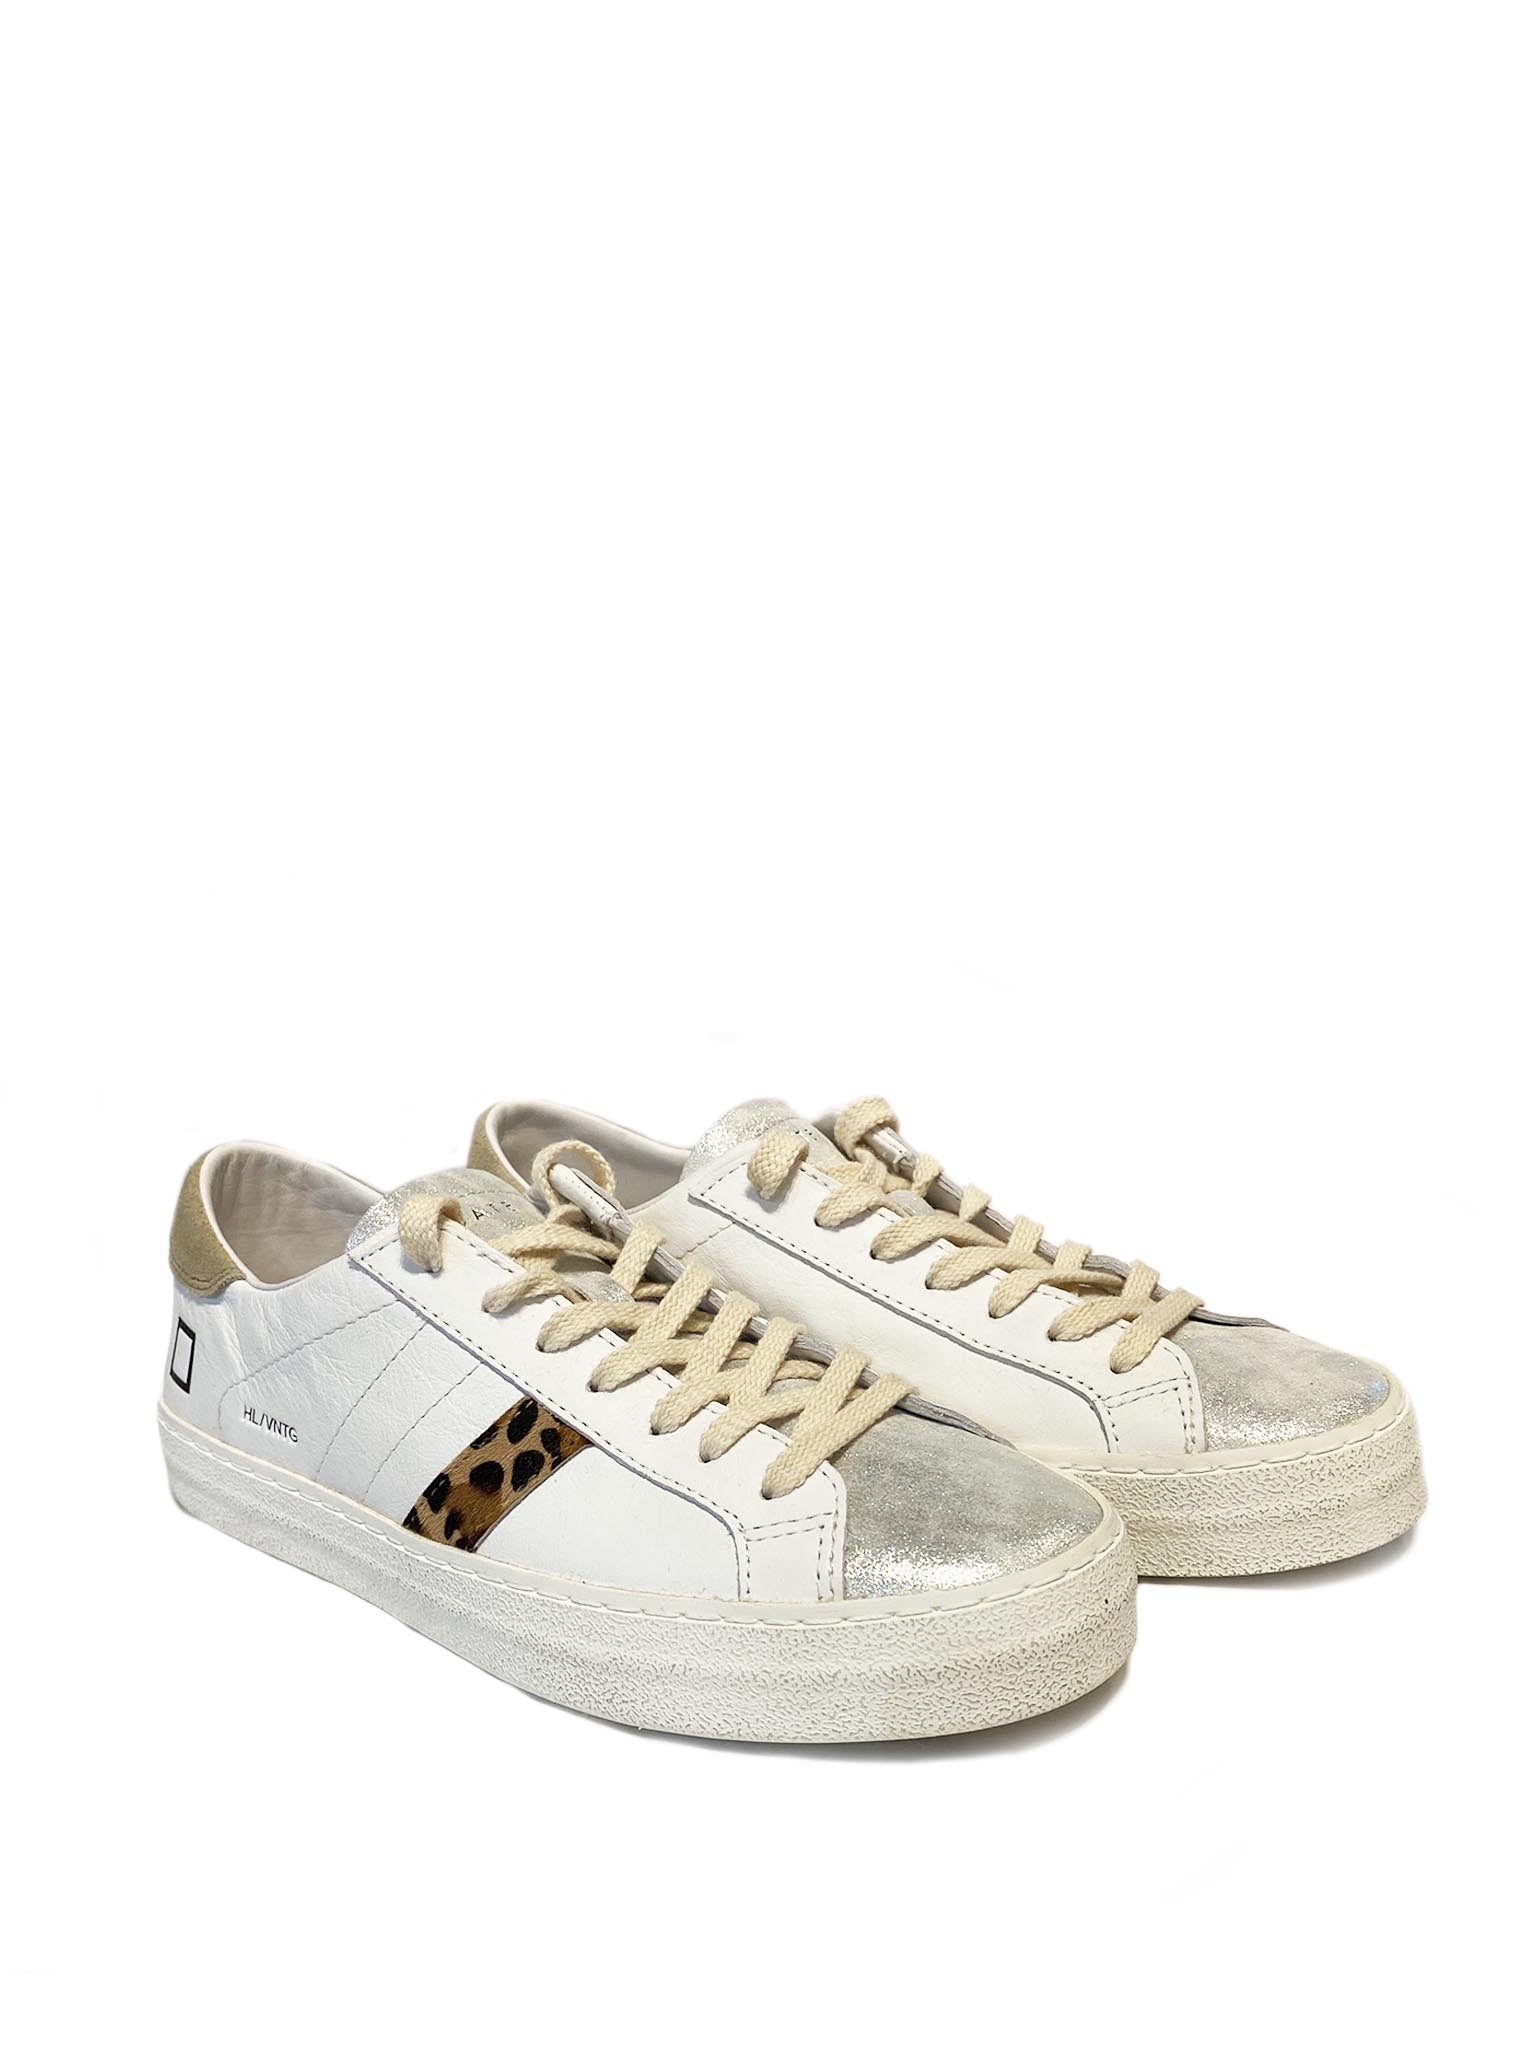 Pair of D.A.T.E Hill Low Vintage Calf White Leopard Trainers Cutout from the side